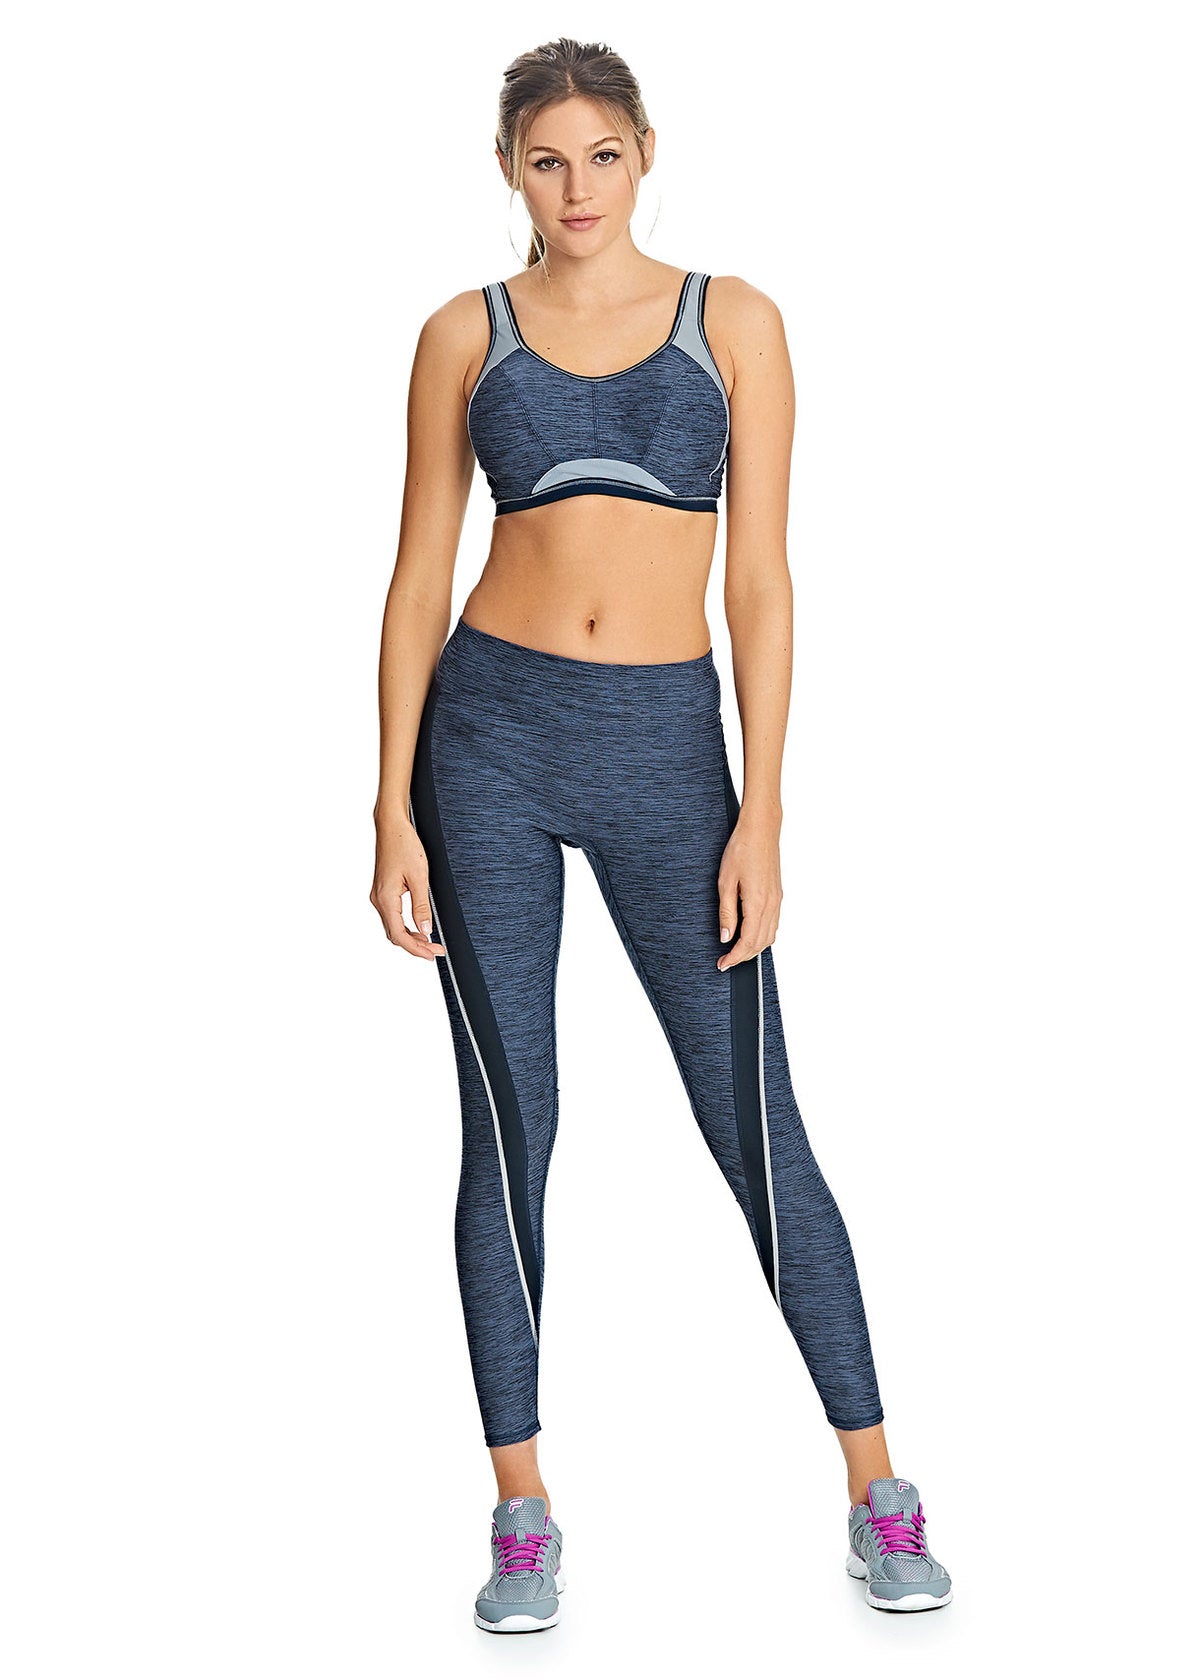 Epic Carbon Moulded Crop Top Sports Bra from Freya